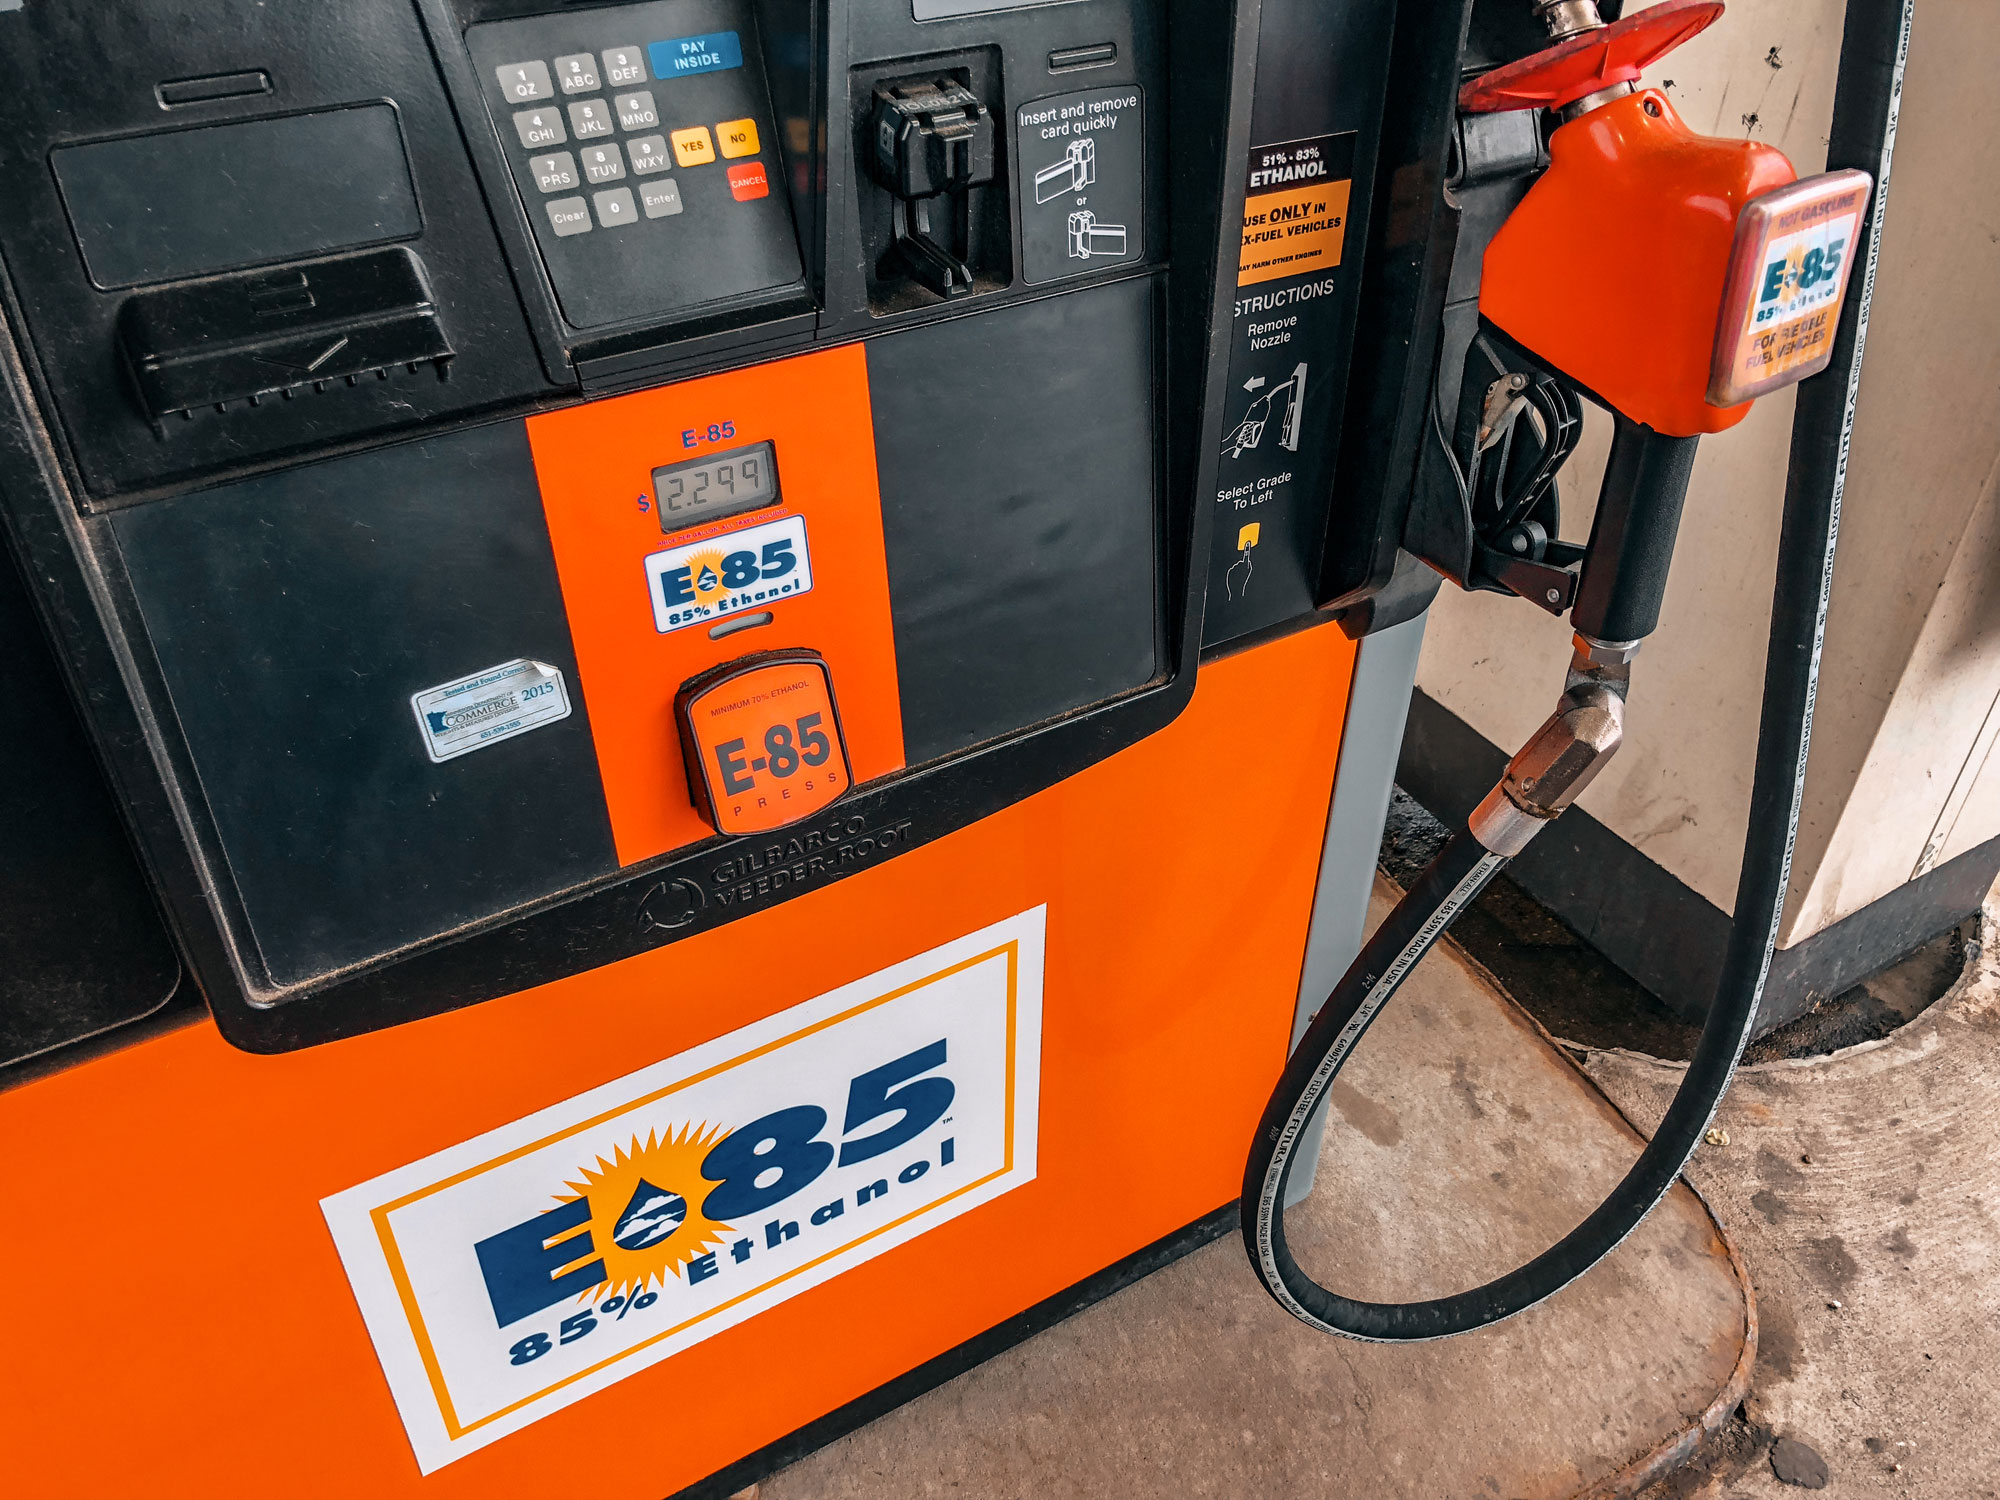 Photograph of an E85 fuel pump in Minnesota. The photo shows an orange and black fuel pump cleared marked "E85, 85% Ethanol" in several places.